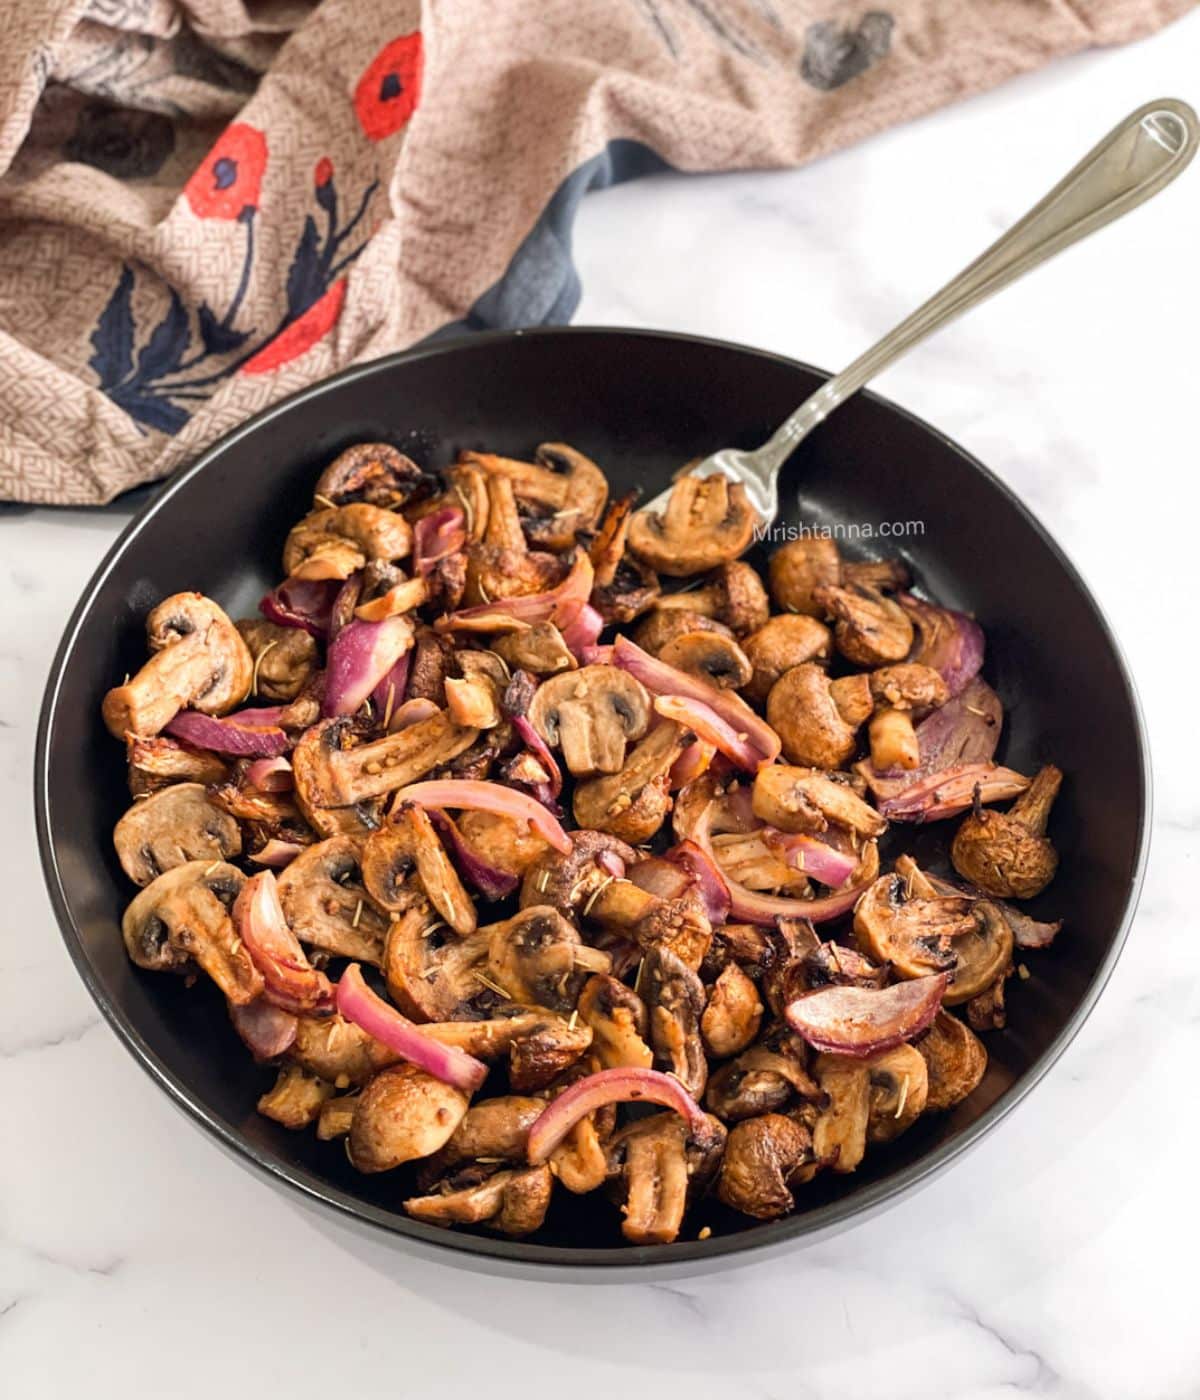 A plate of air fryer mushrooms and onions on the table with a fork inserted.